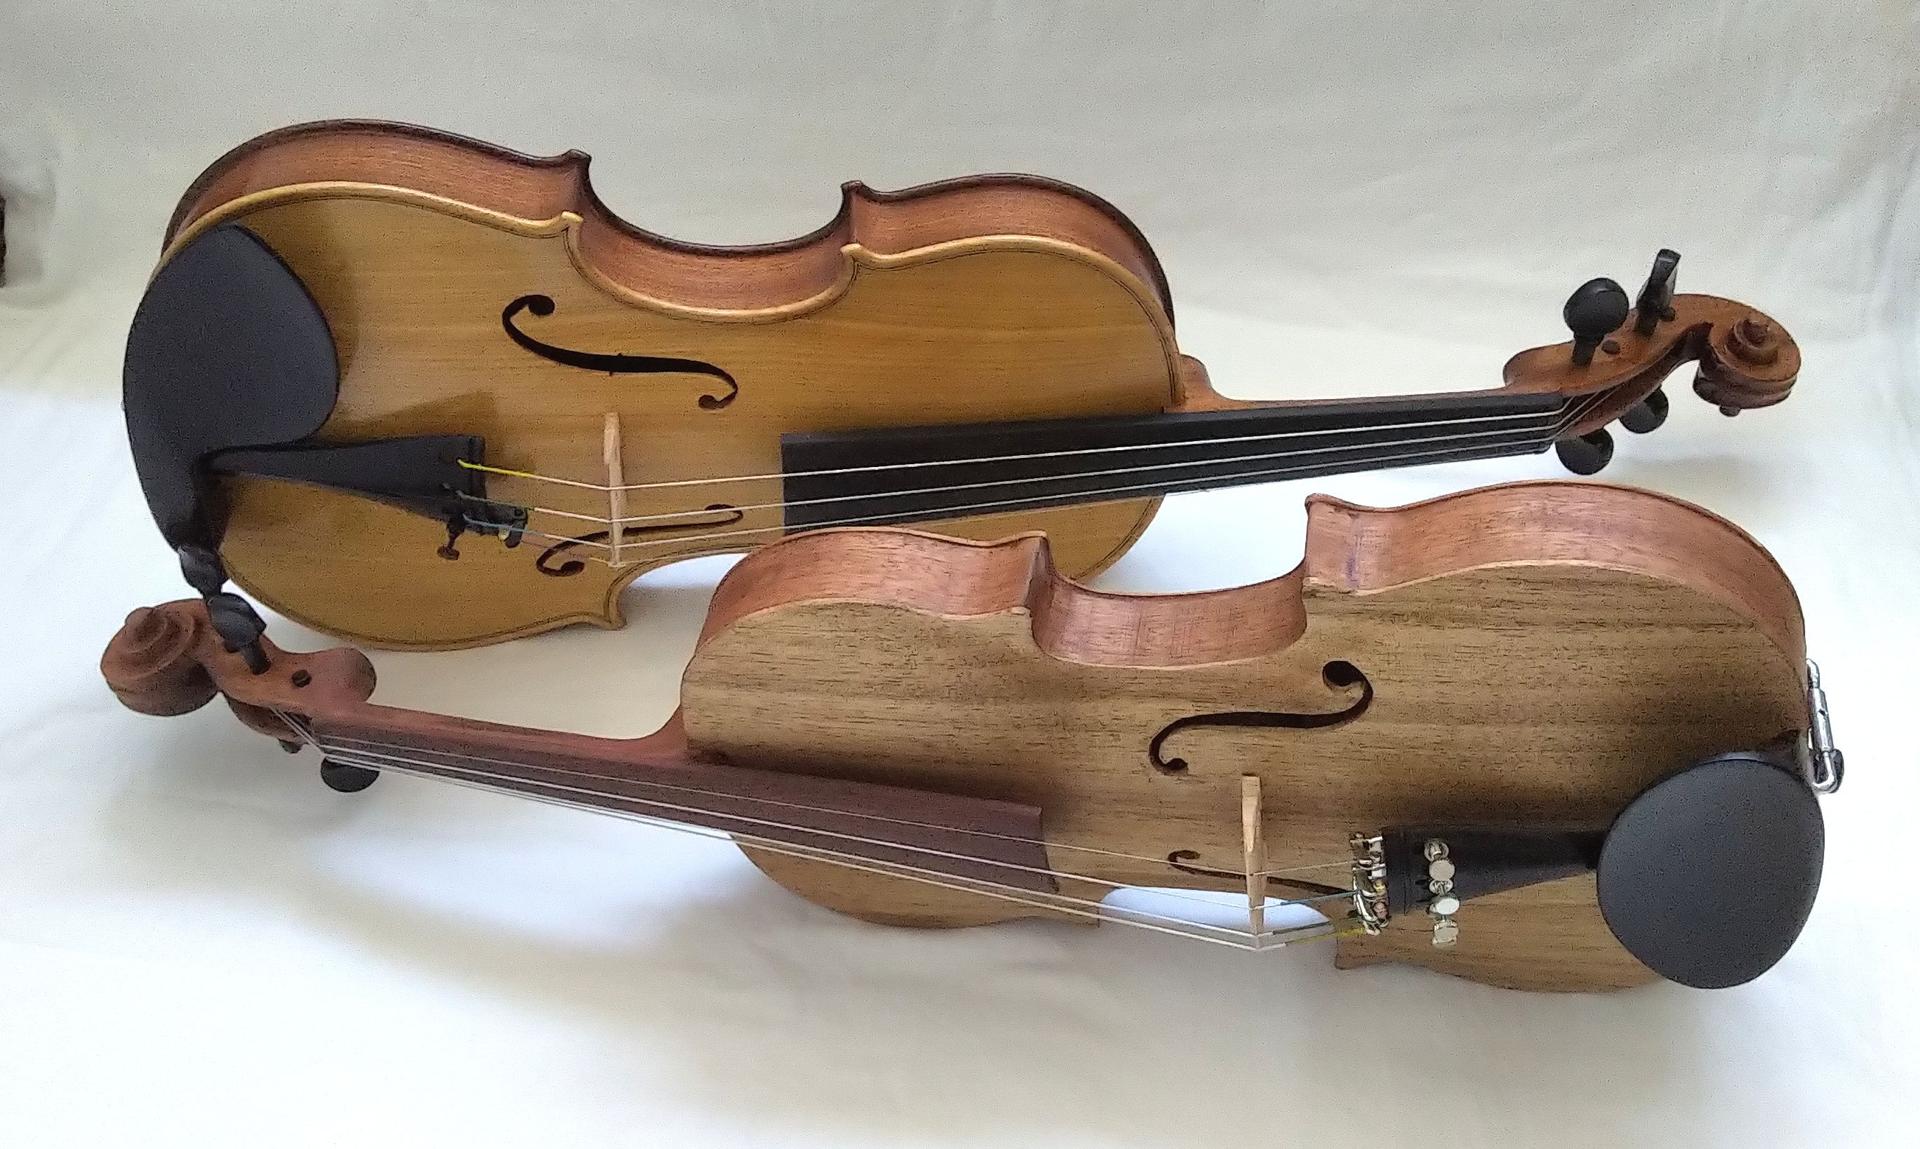  Two violins constructed by the researchers of the article